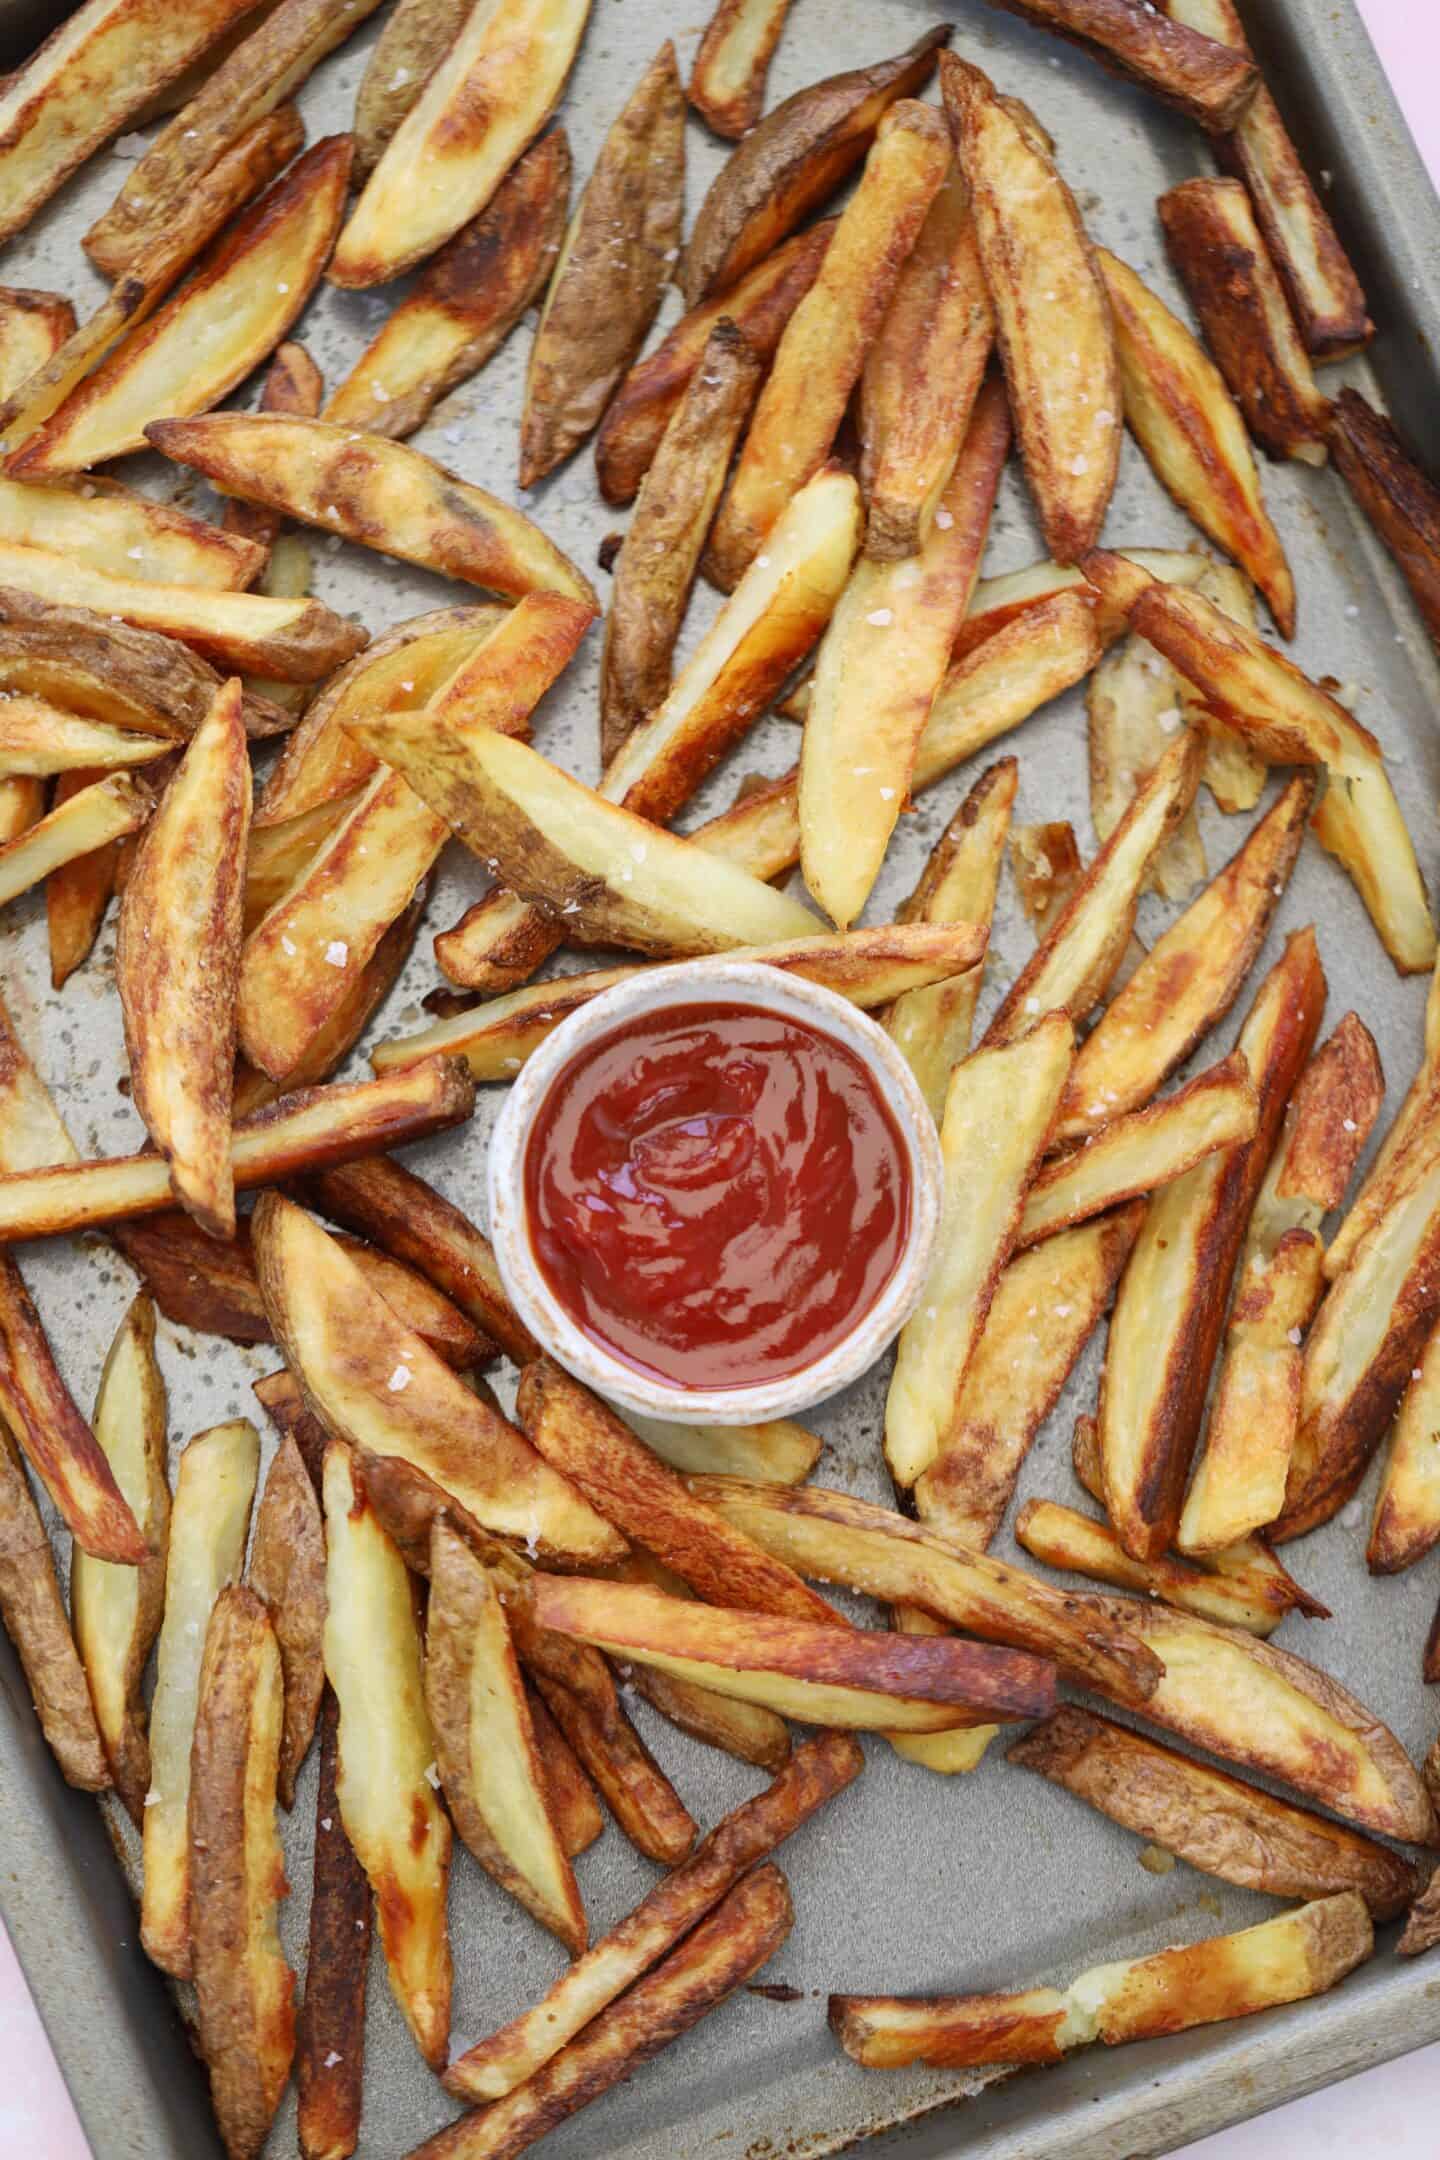 A tray of skin on fries with tomato ketchup.